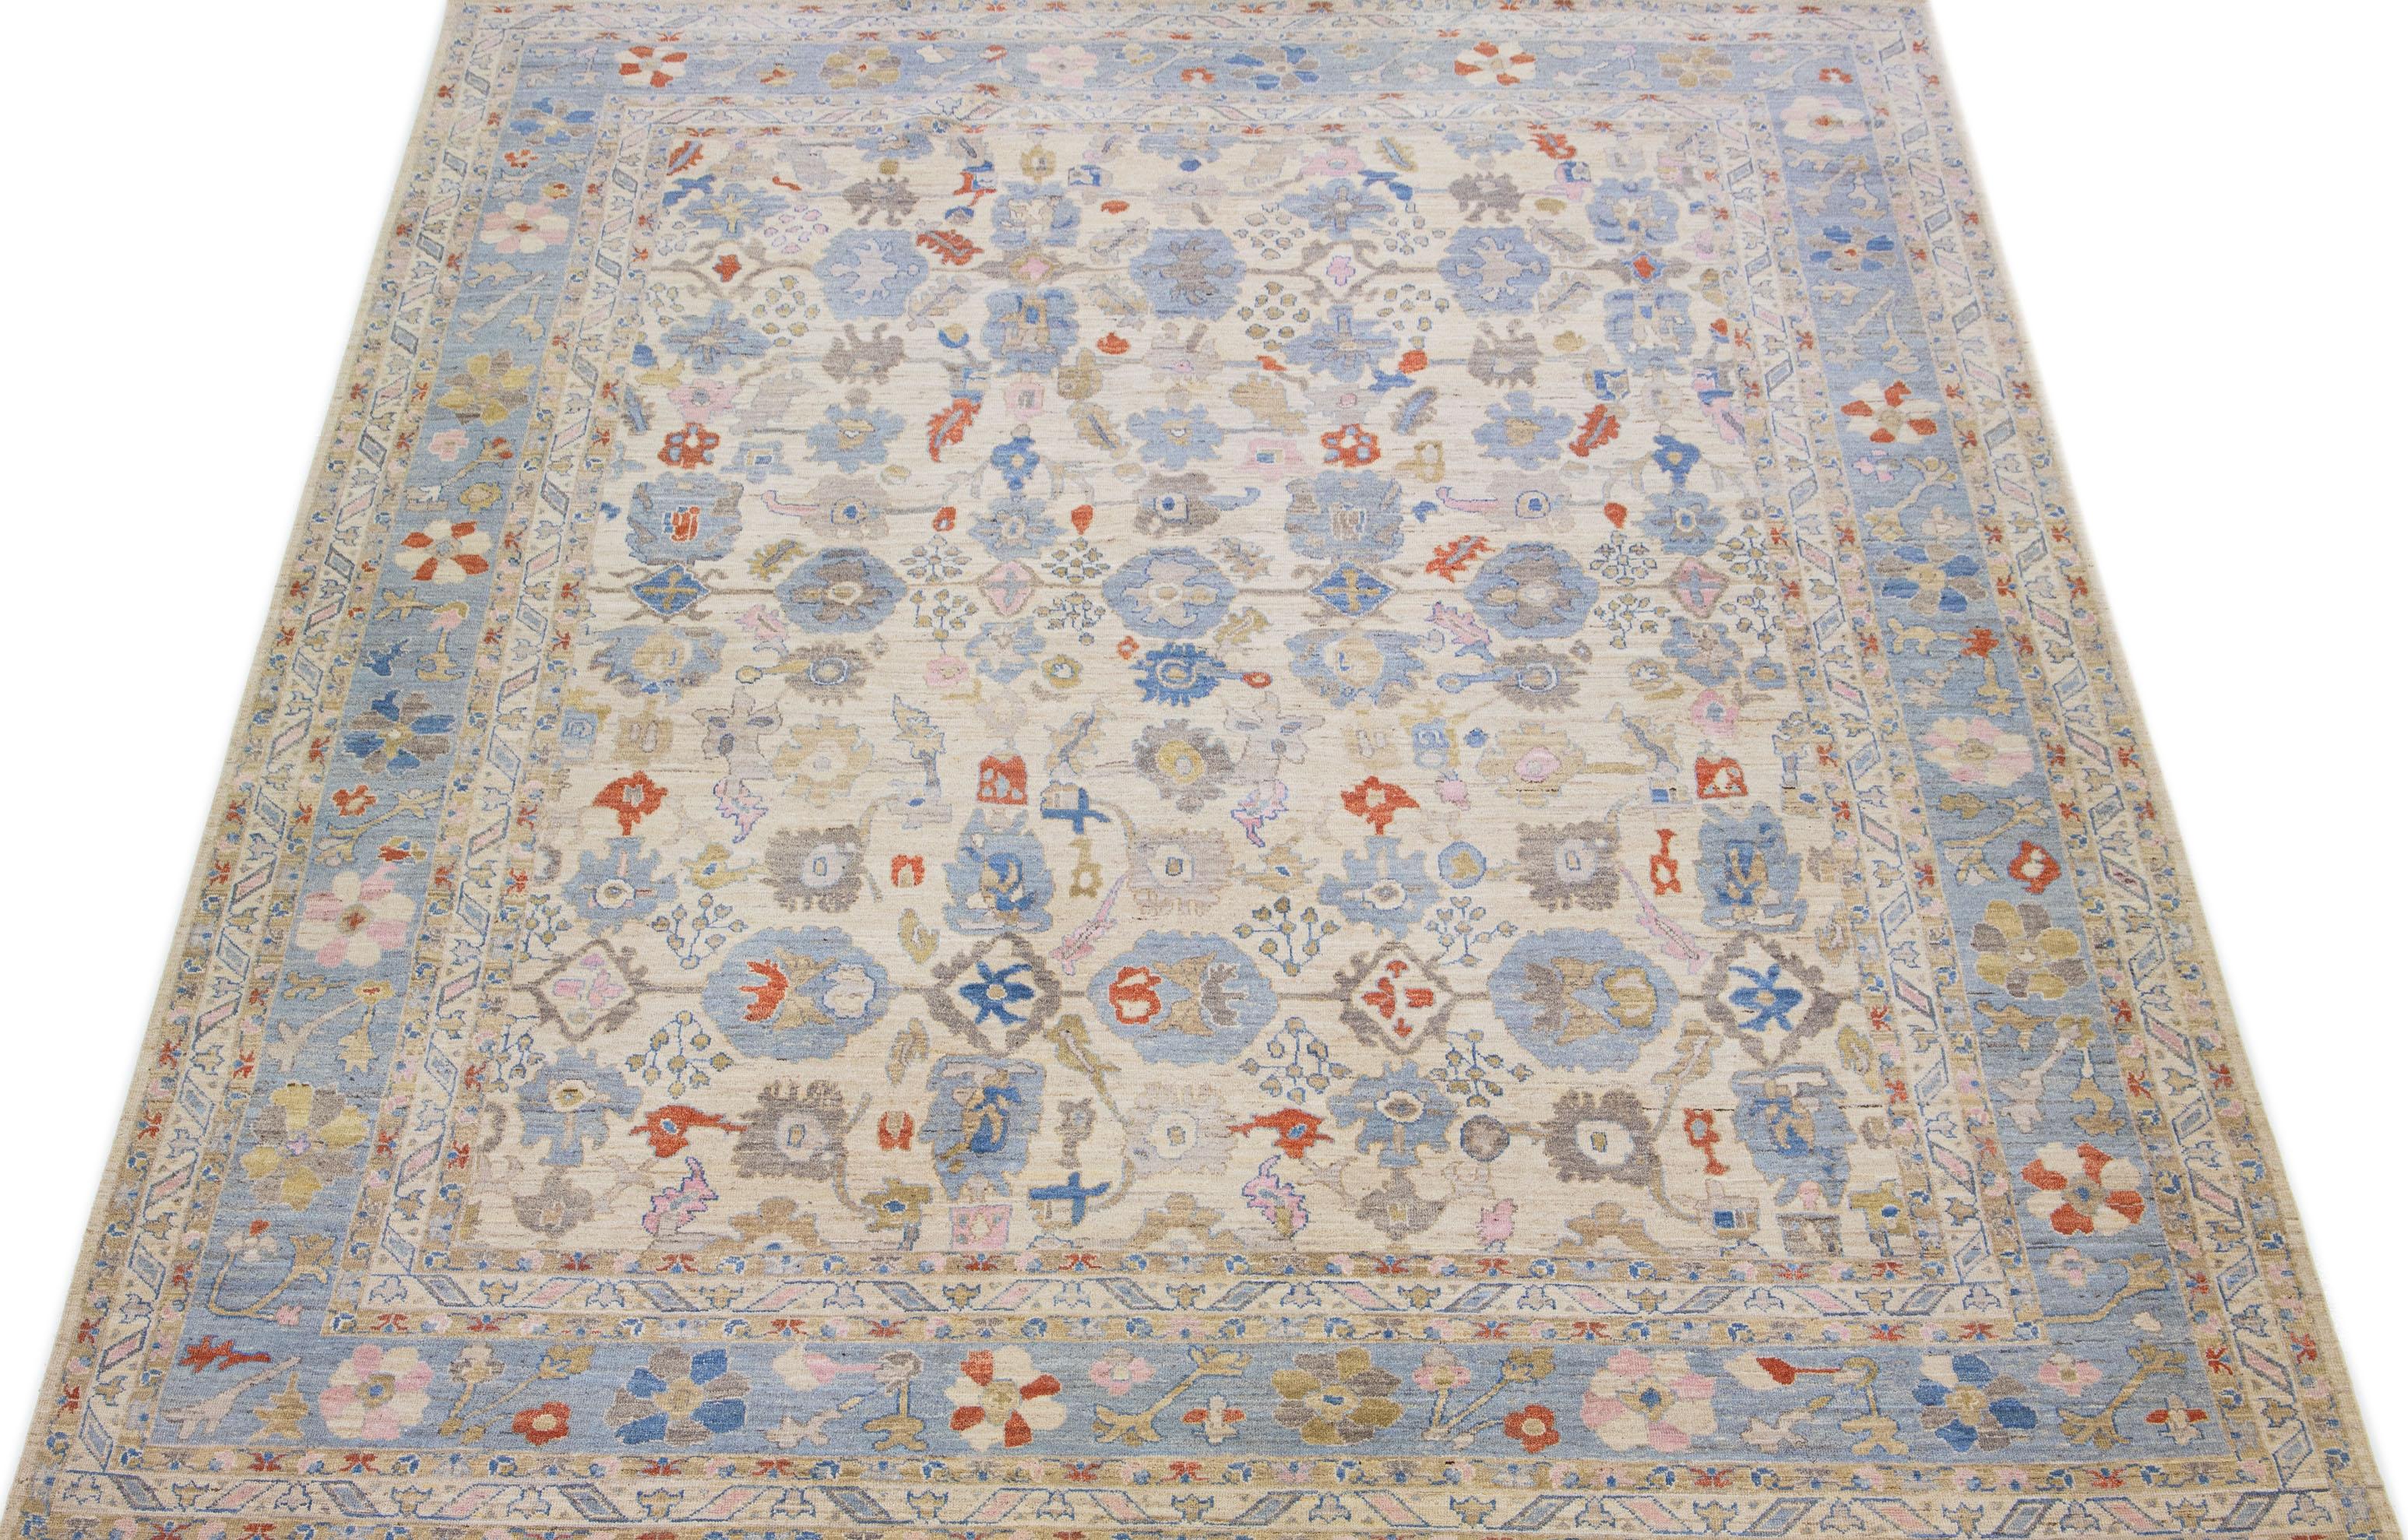 This hand-knotted wool rug showcases an exquisite modern Oversize Sultanabad design in a stunning beige color palette. Its intricate blue frame features beautiful accents in rust, blue, and pink hues arranged in a remarkable all-over pattern.

This